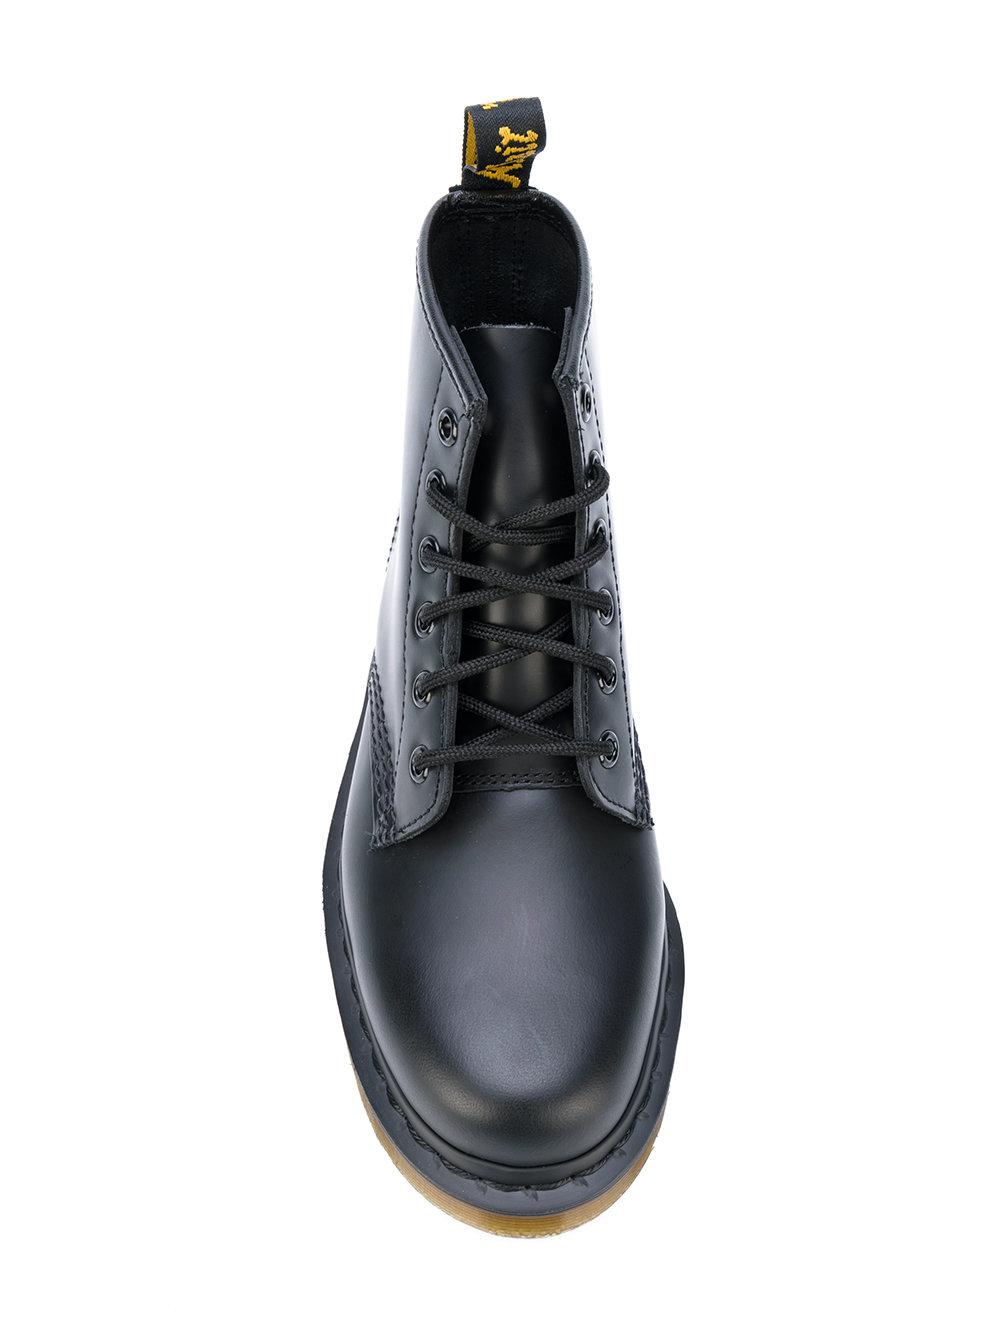 Dr. Martens Leather 101 Smooth Boots in Black | Lyst